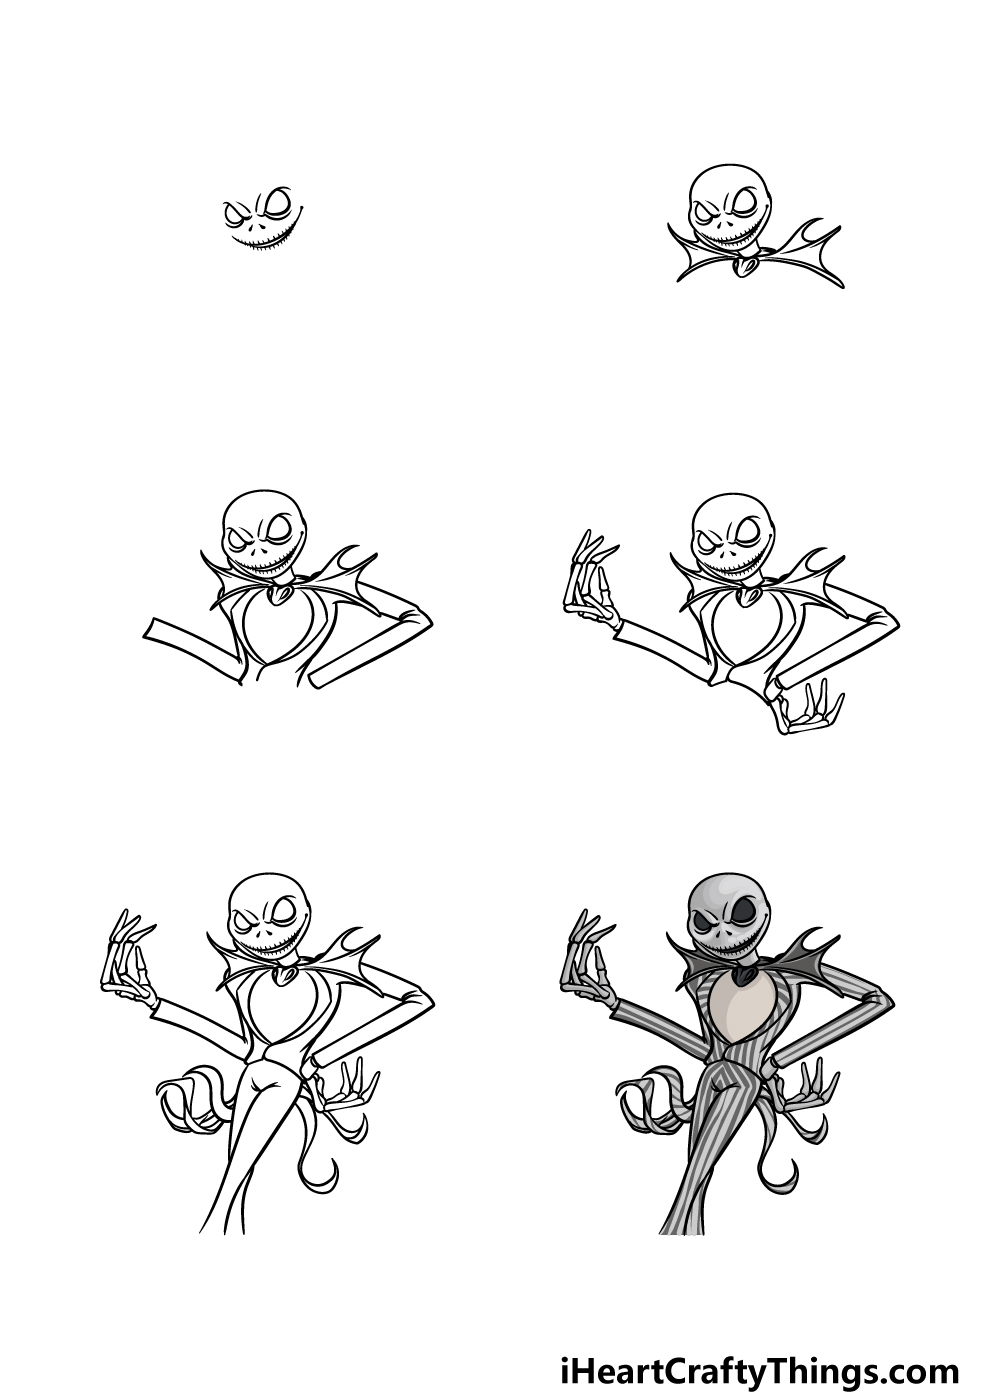 How To Draw Jack Skellington in 6 steps